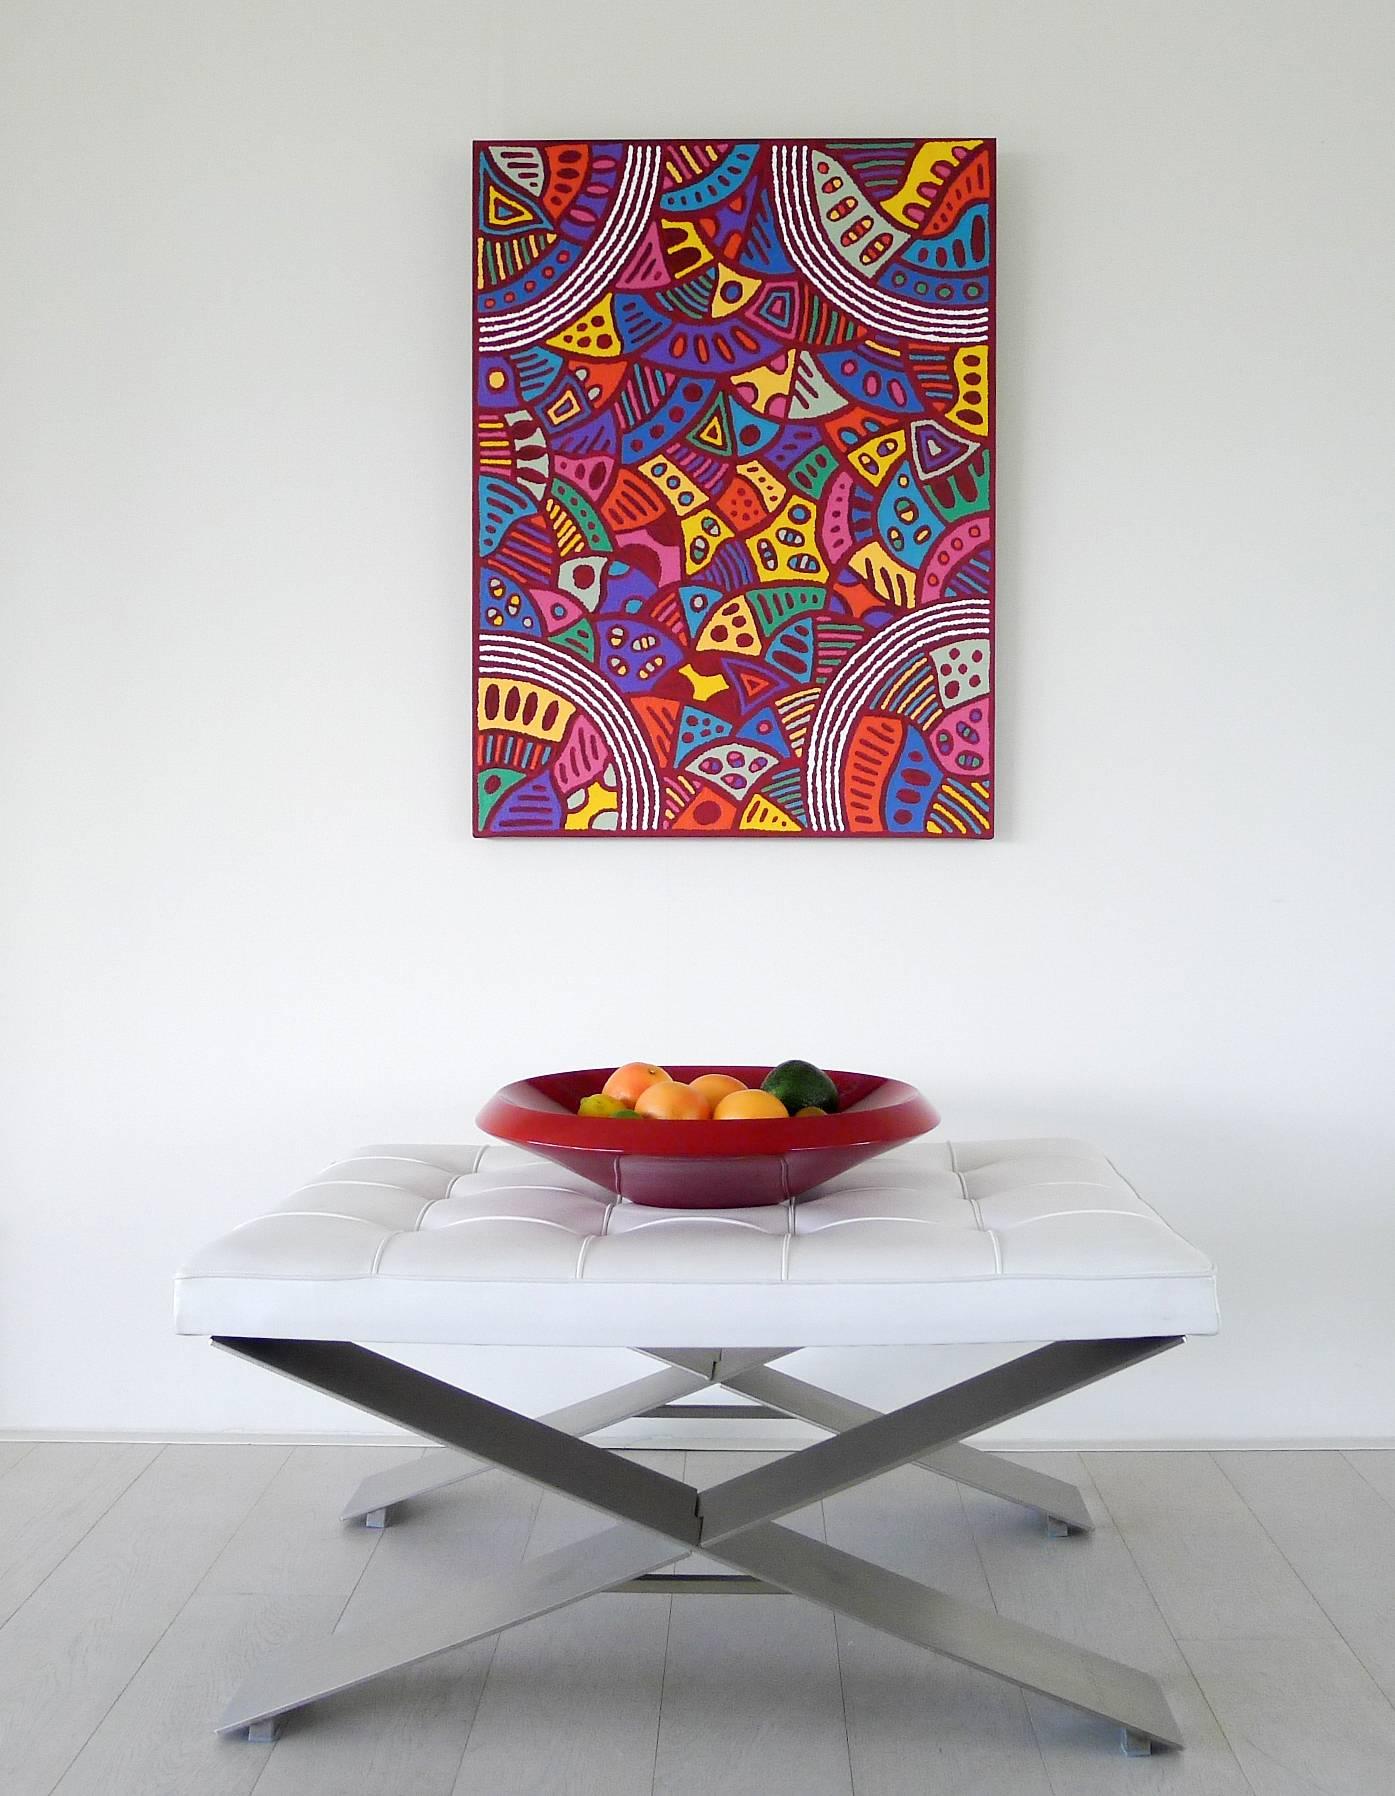 'Minyma Tjukurla' by Andrea Giles.

This bright and lively patterned painting is by younger generation artist Andrea Giles. Utilising a graphic style with bold shapes and bright colours, this painting has drawn comparisons with the work of Keith